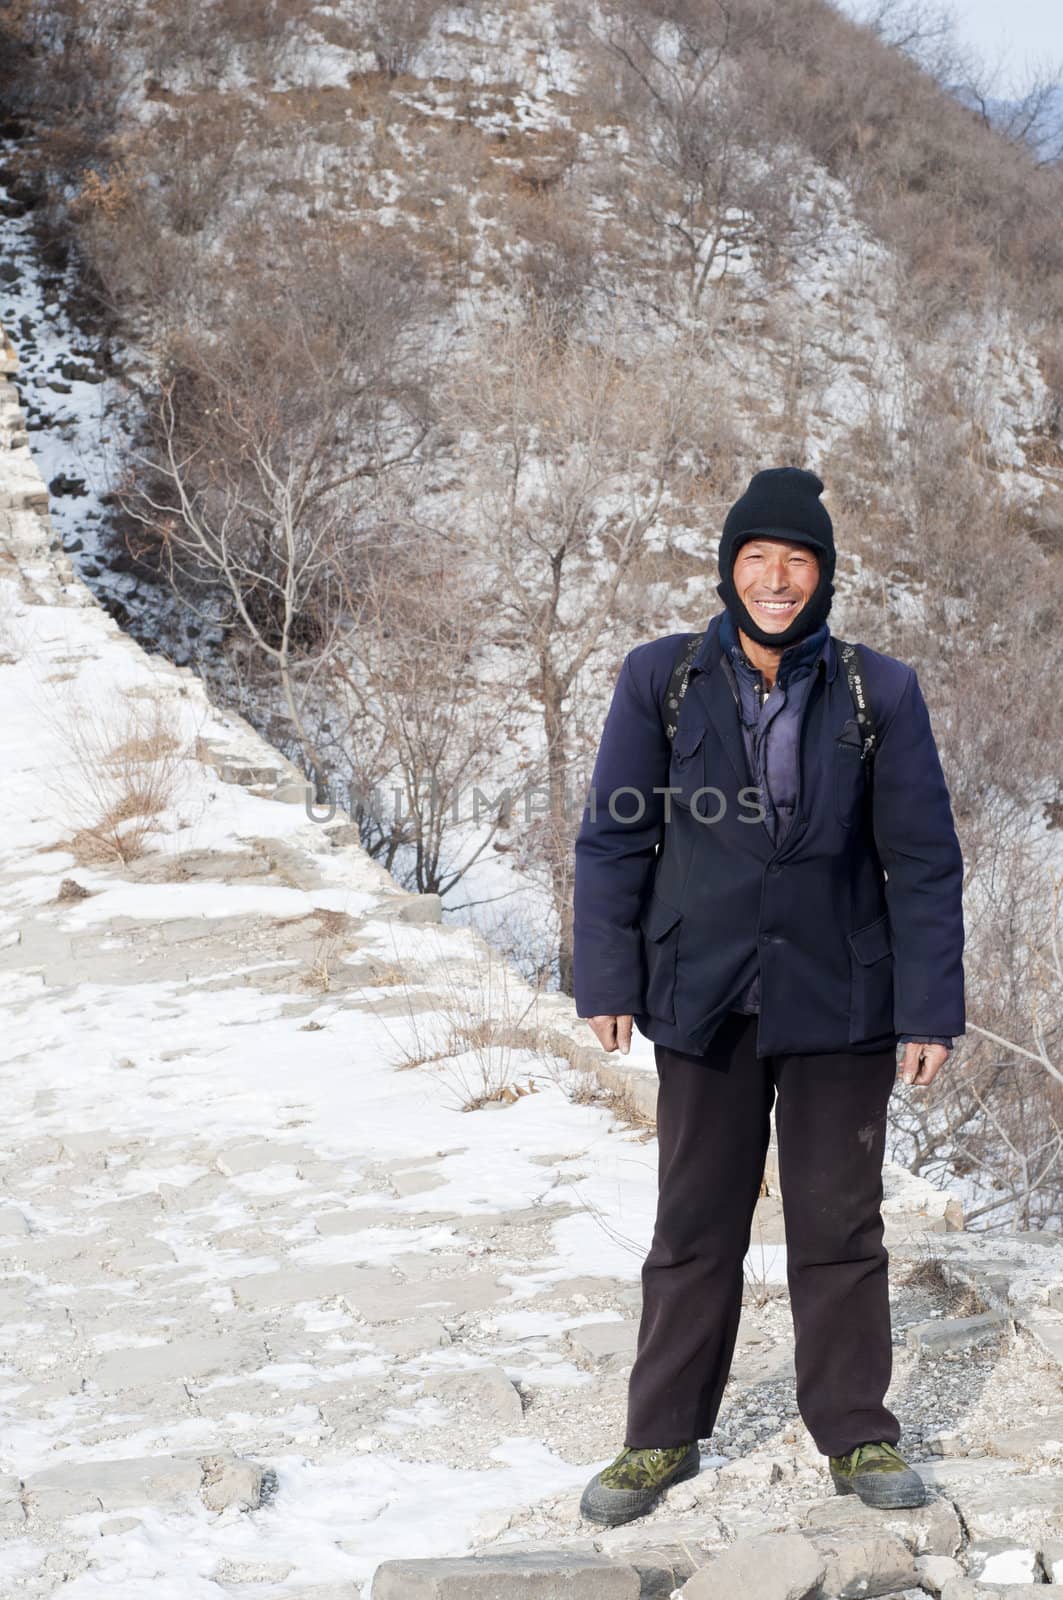 Great Wall, China - January 20:  One of the many Chinese men that help carry goods along the Great Wall of China on January 20, 2010.  A very hard way to make income in China.